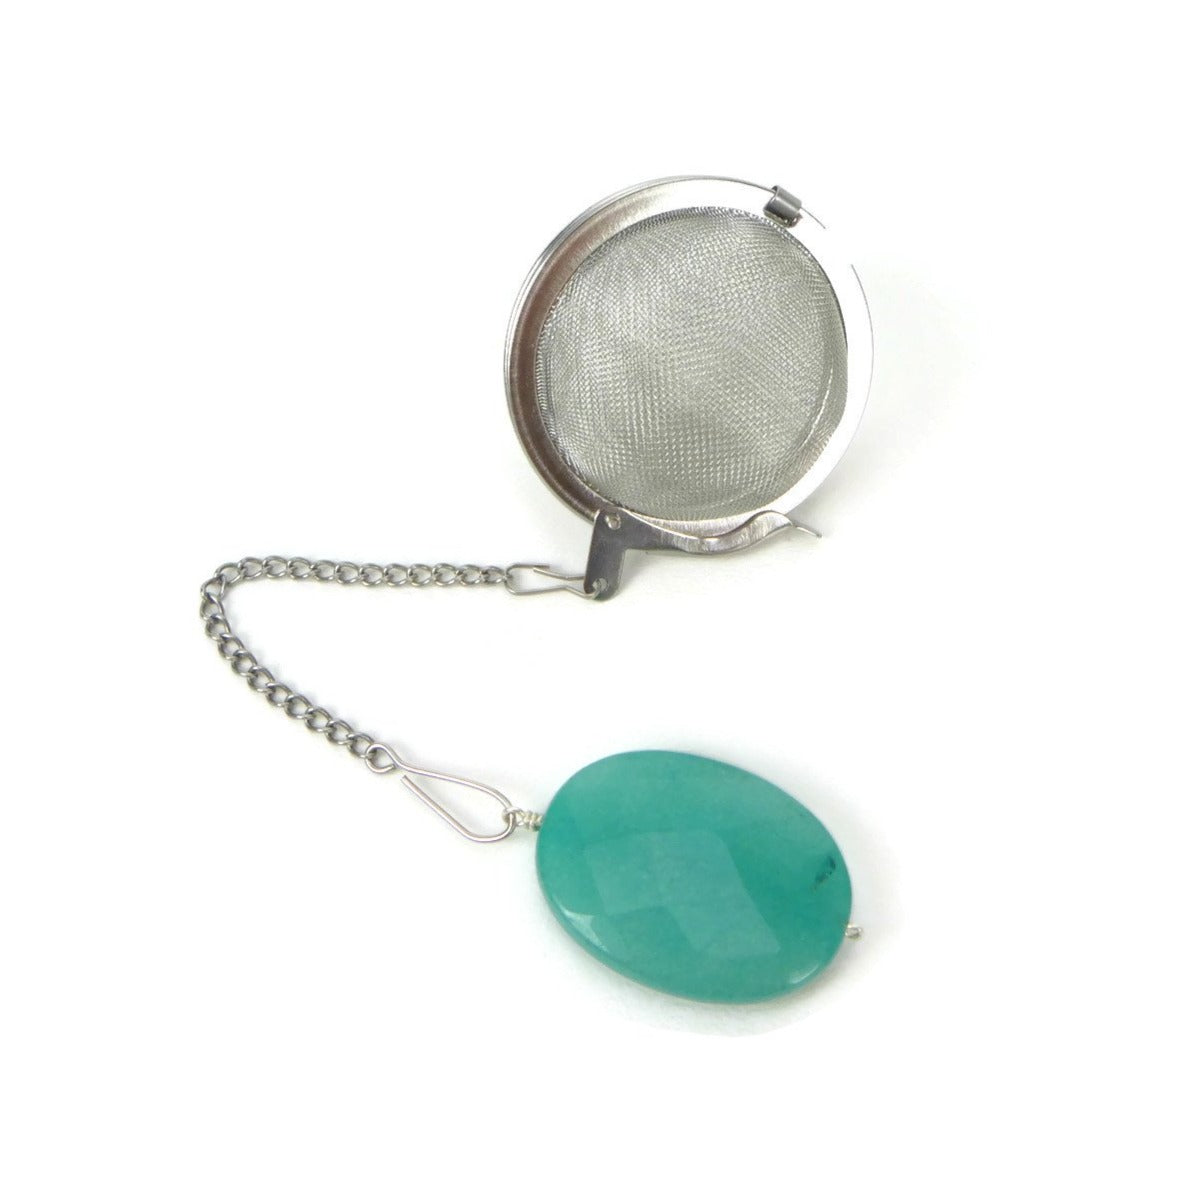 Tea Infuser with Teal Oval Charm